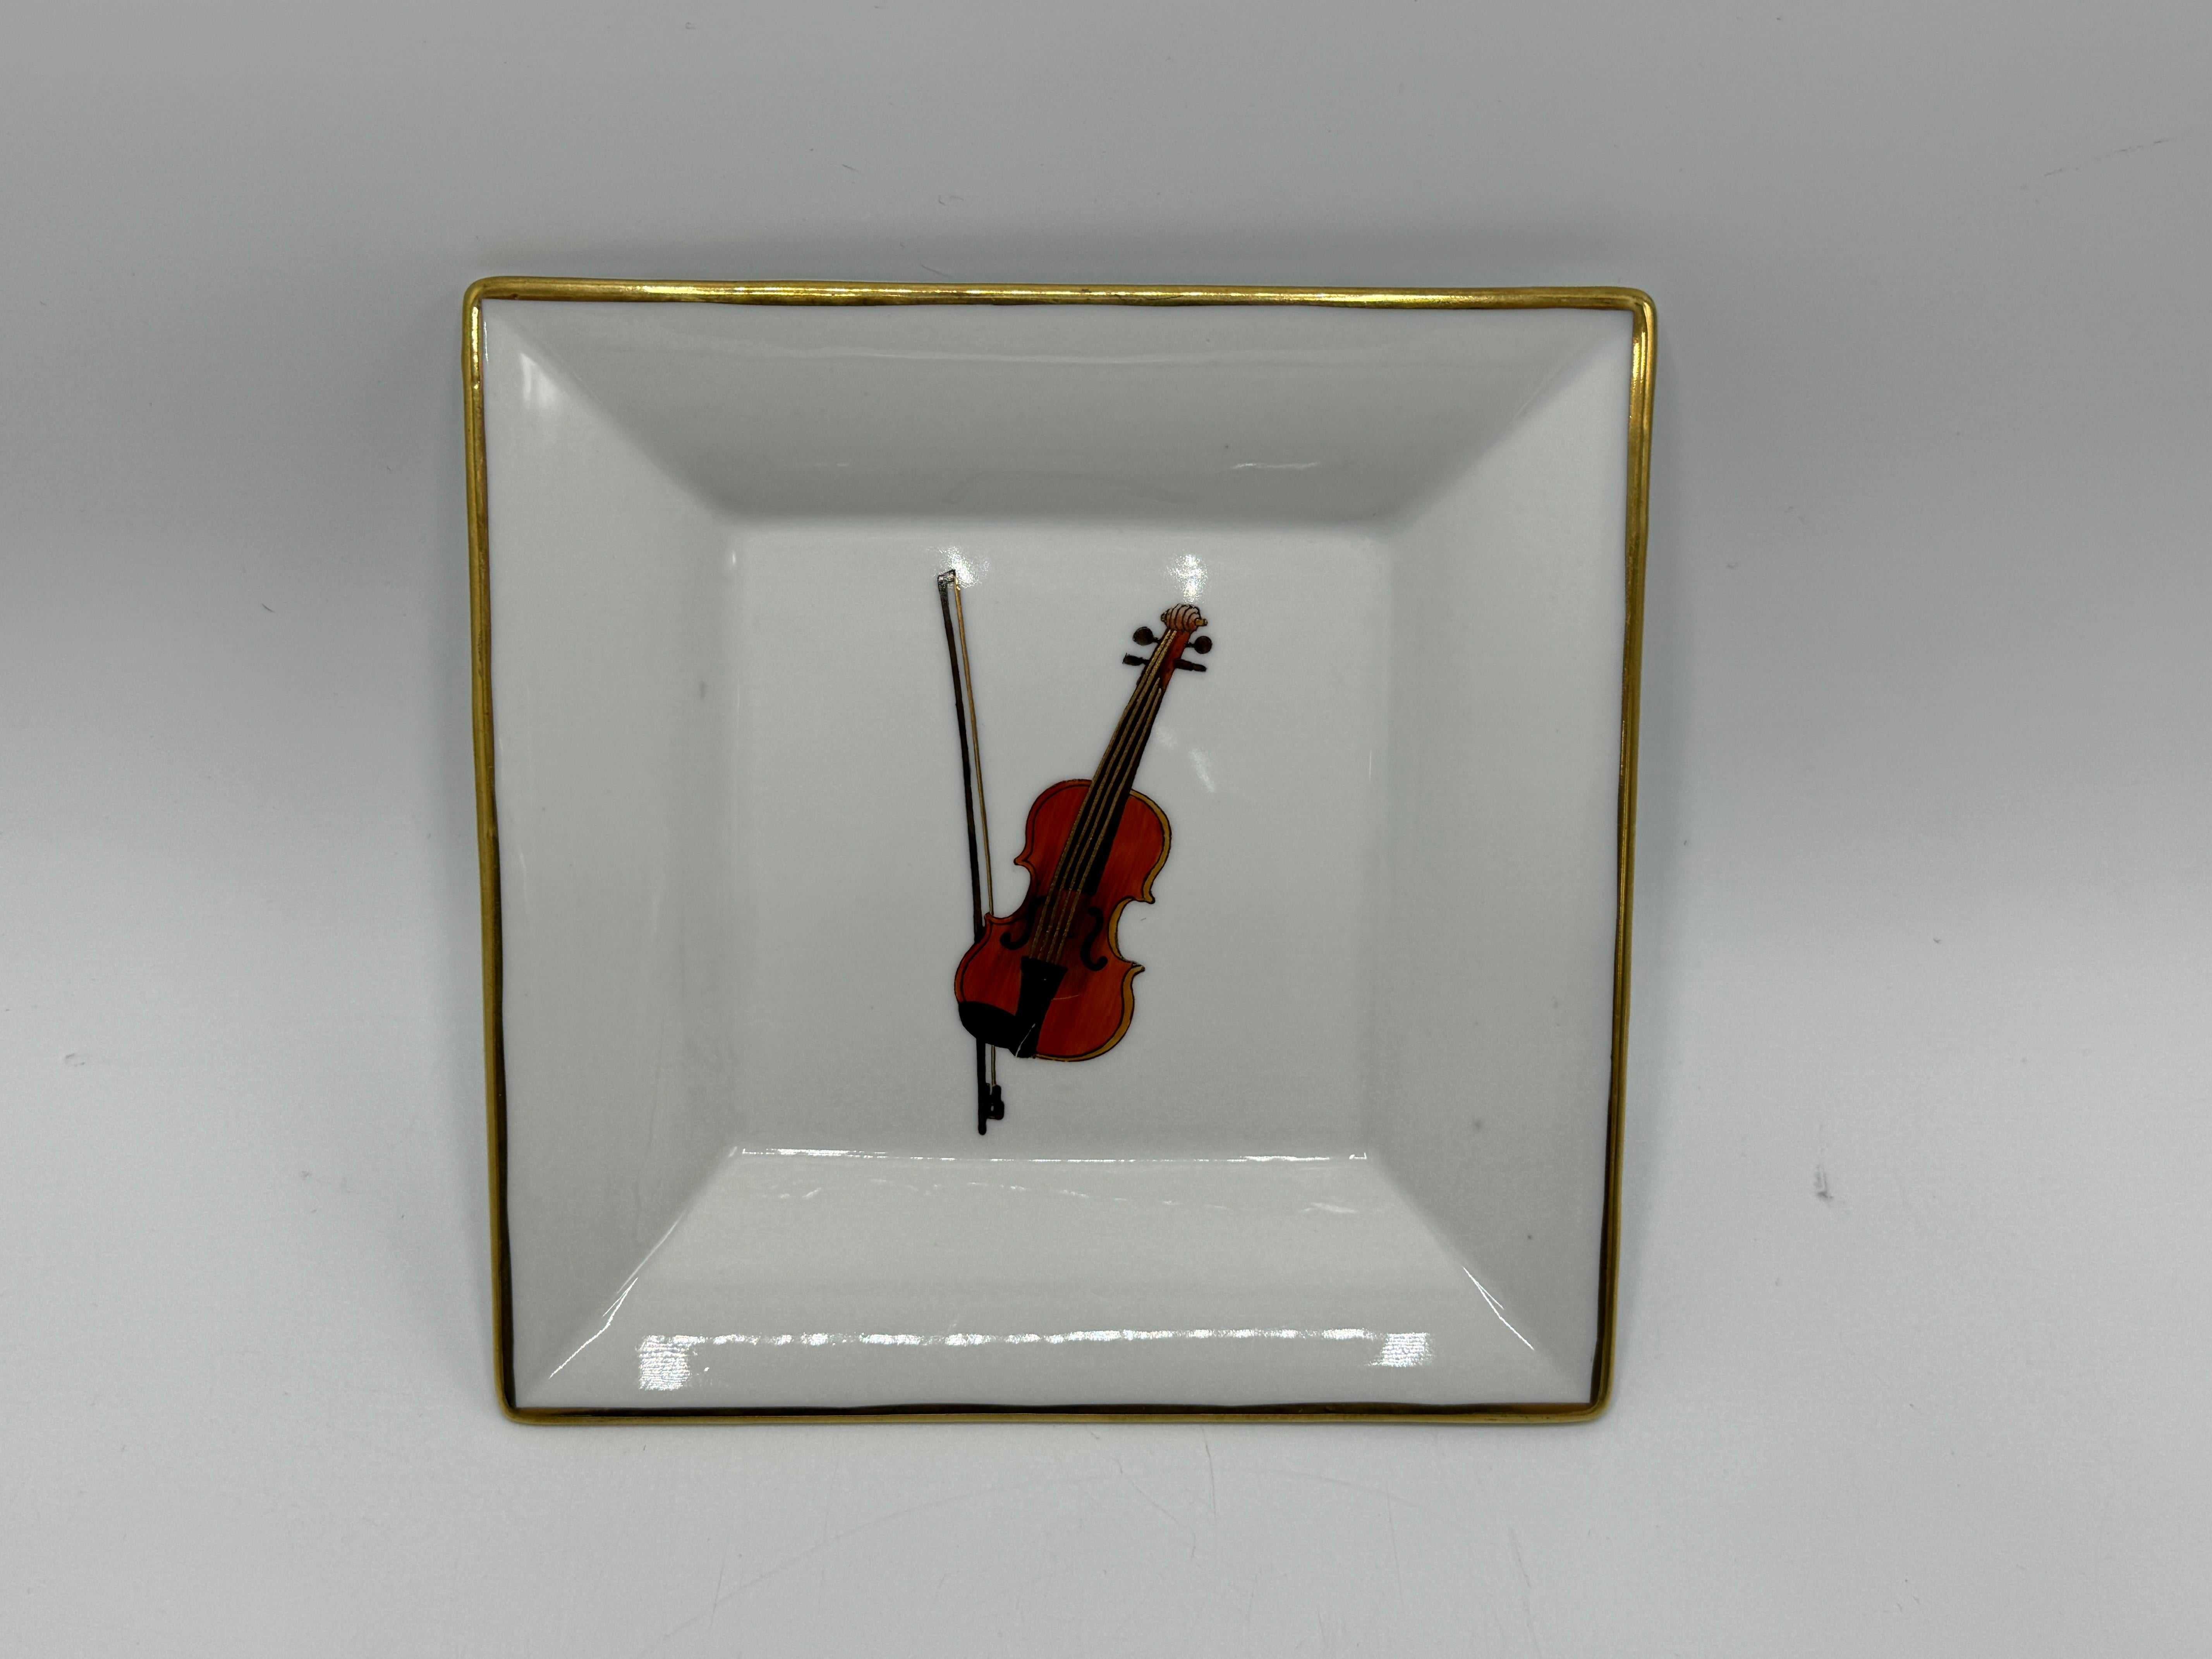 Offered is a fabulous, late 20th Century, porcelain valet or ring dish. The piece depicts a violin and and bow in the center with gold along the edge. The perfect objet for a musician or musical arts enthusiast. Heavy, weighing 1.2lbs. 